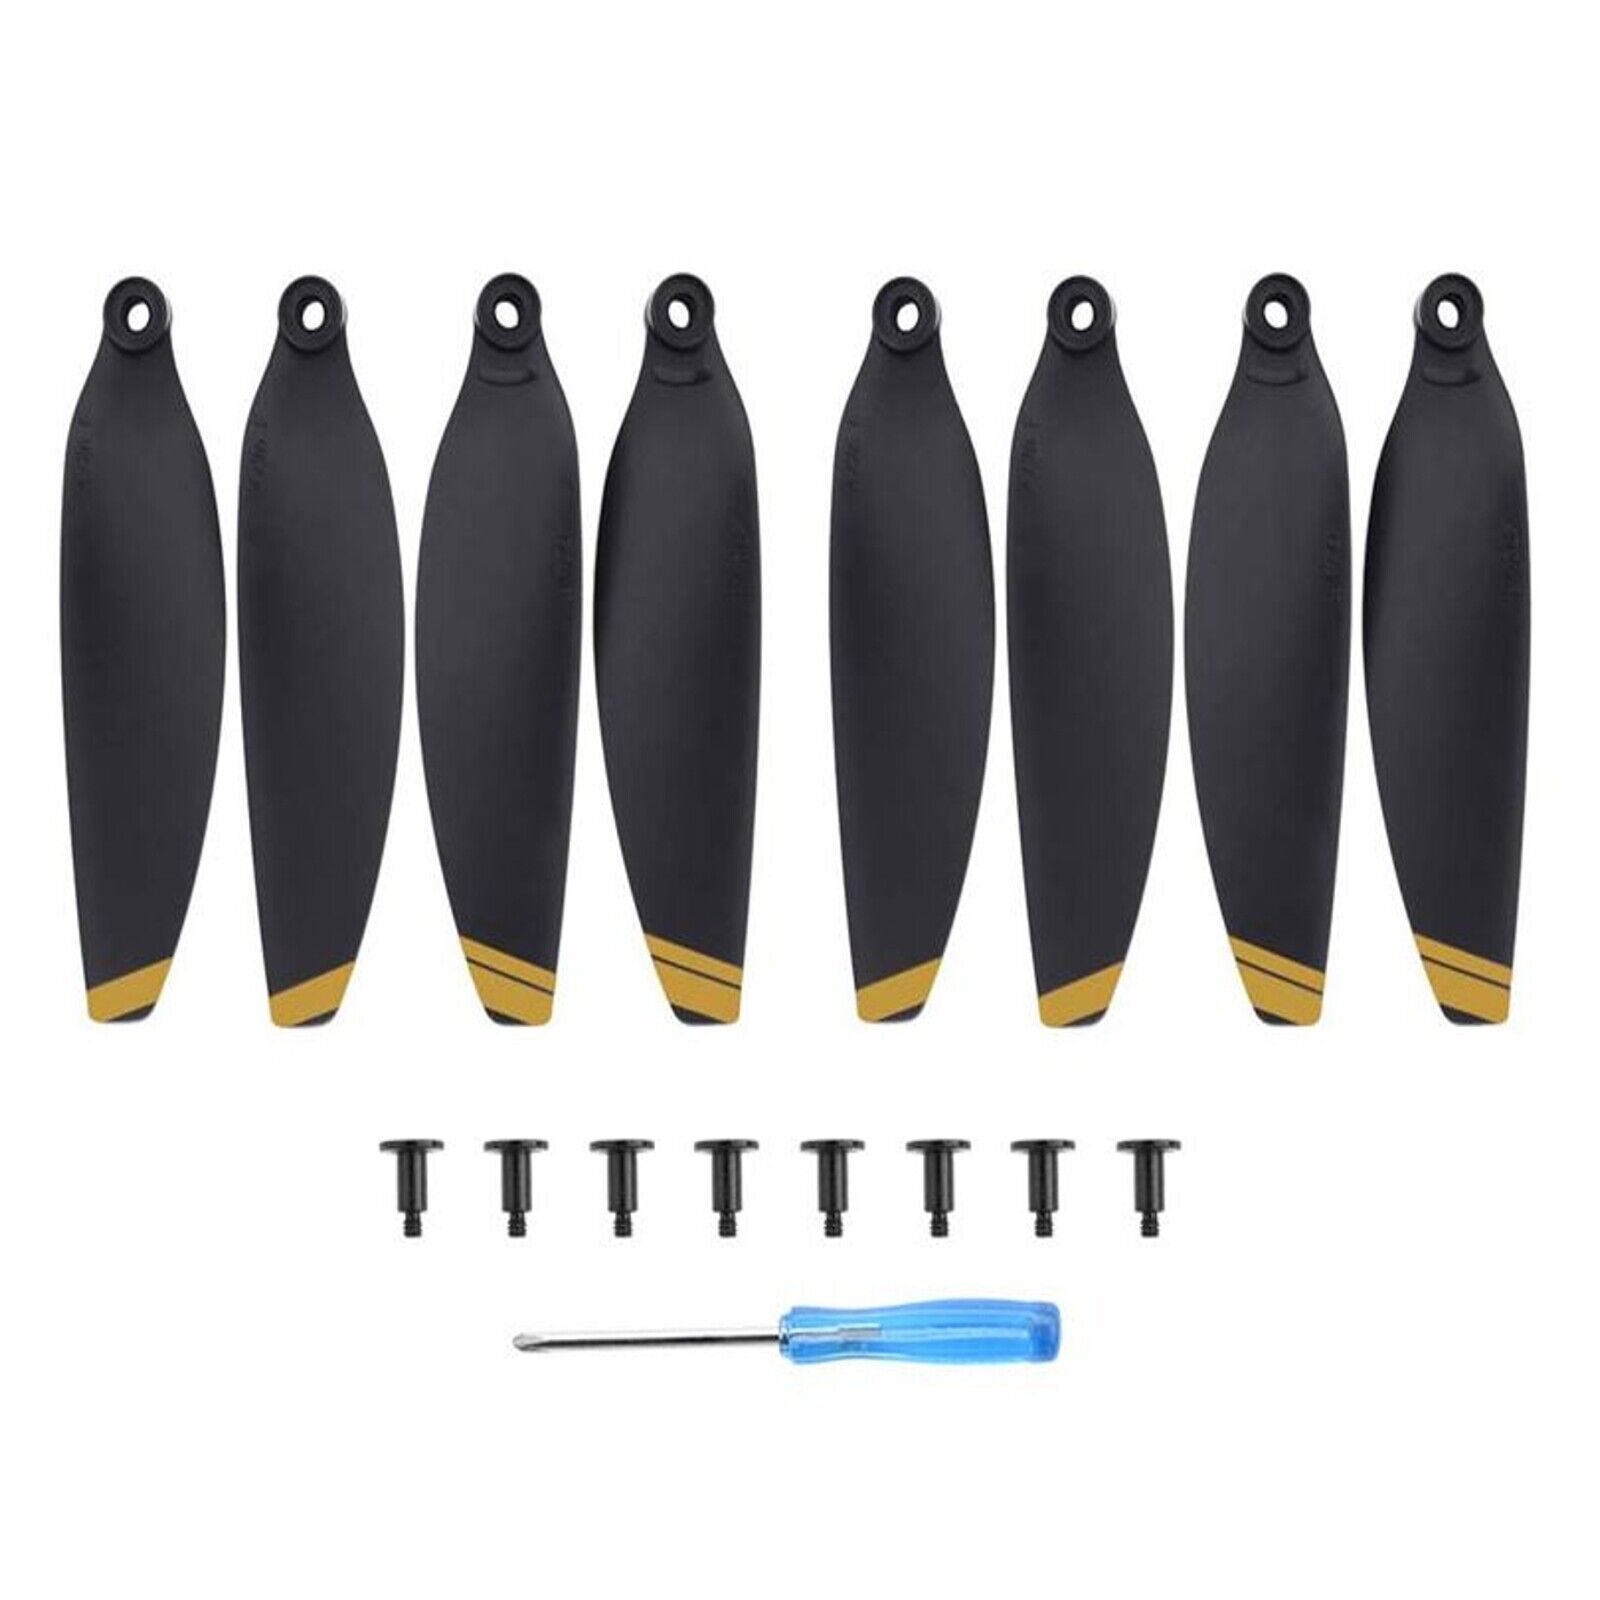 Low noise replacement blades for DJI Mavic Mini